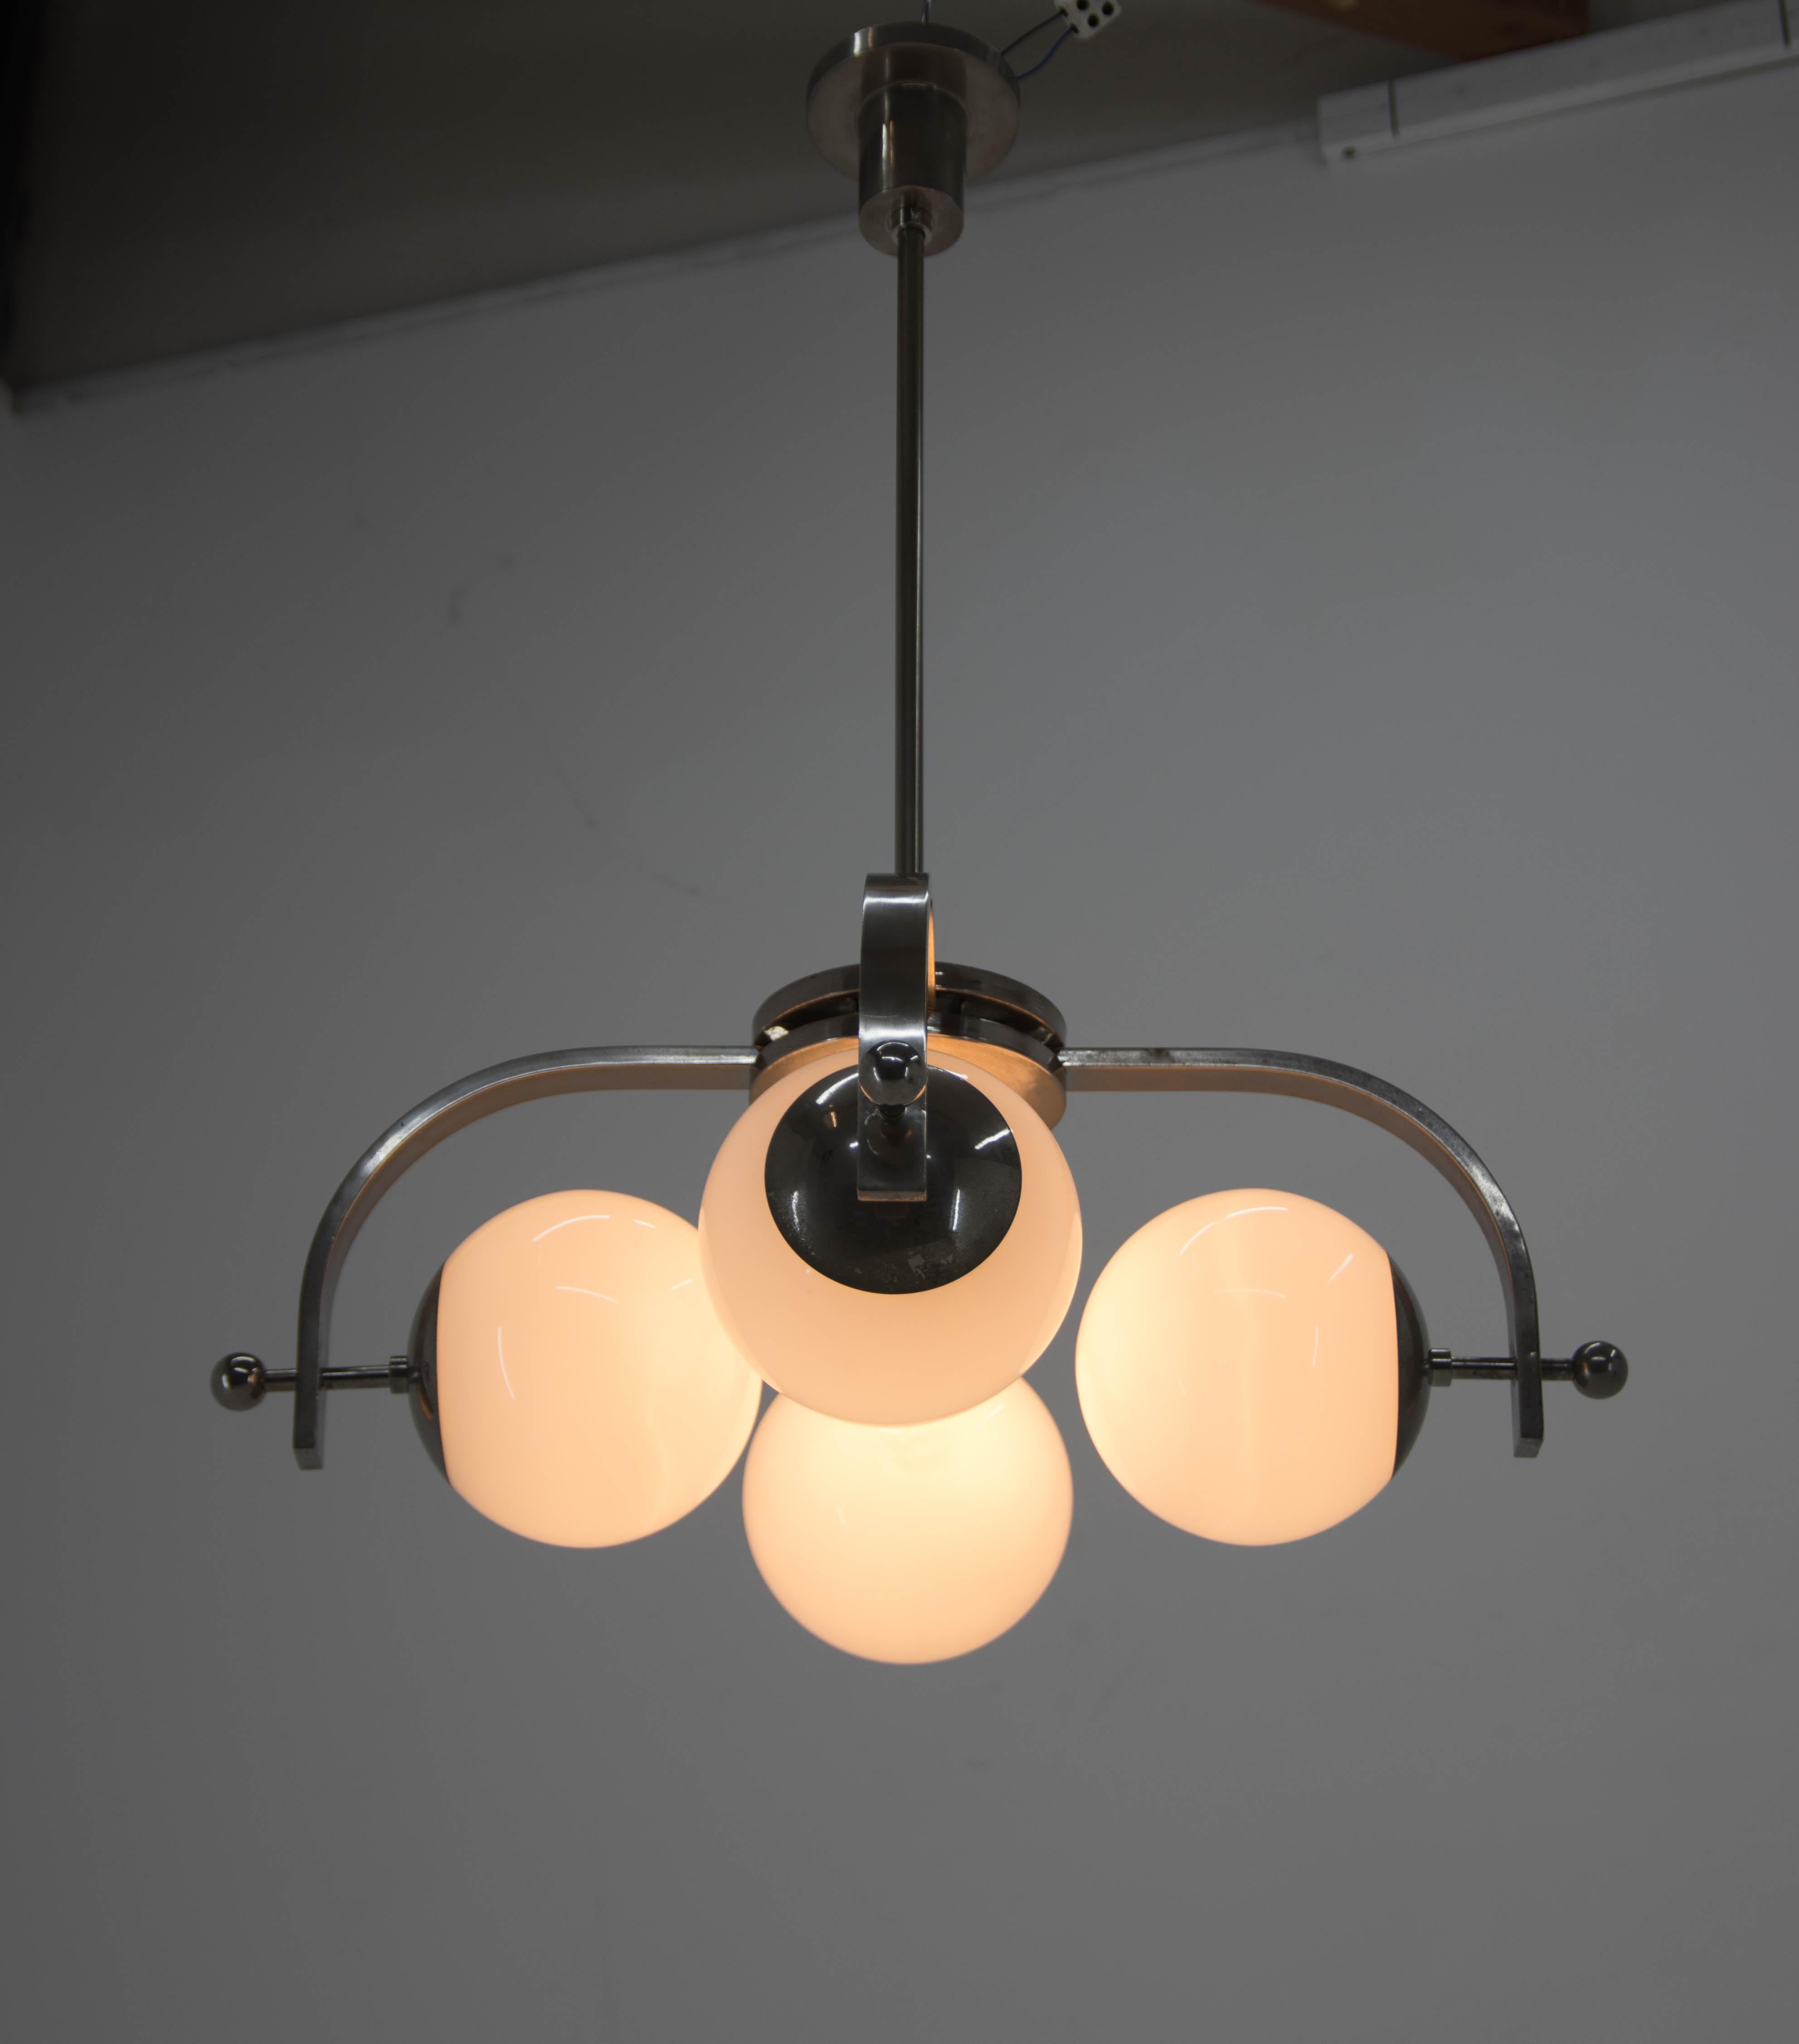 Rare Bauhaus 4-flamming chandelier.
Restored: nickel with age patina cleaned and polished
Glass in perfect condition.
Rewired: 4x40W, E25-E27 bulbs
US wiring compatible.